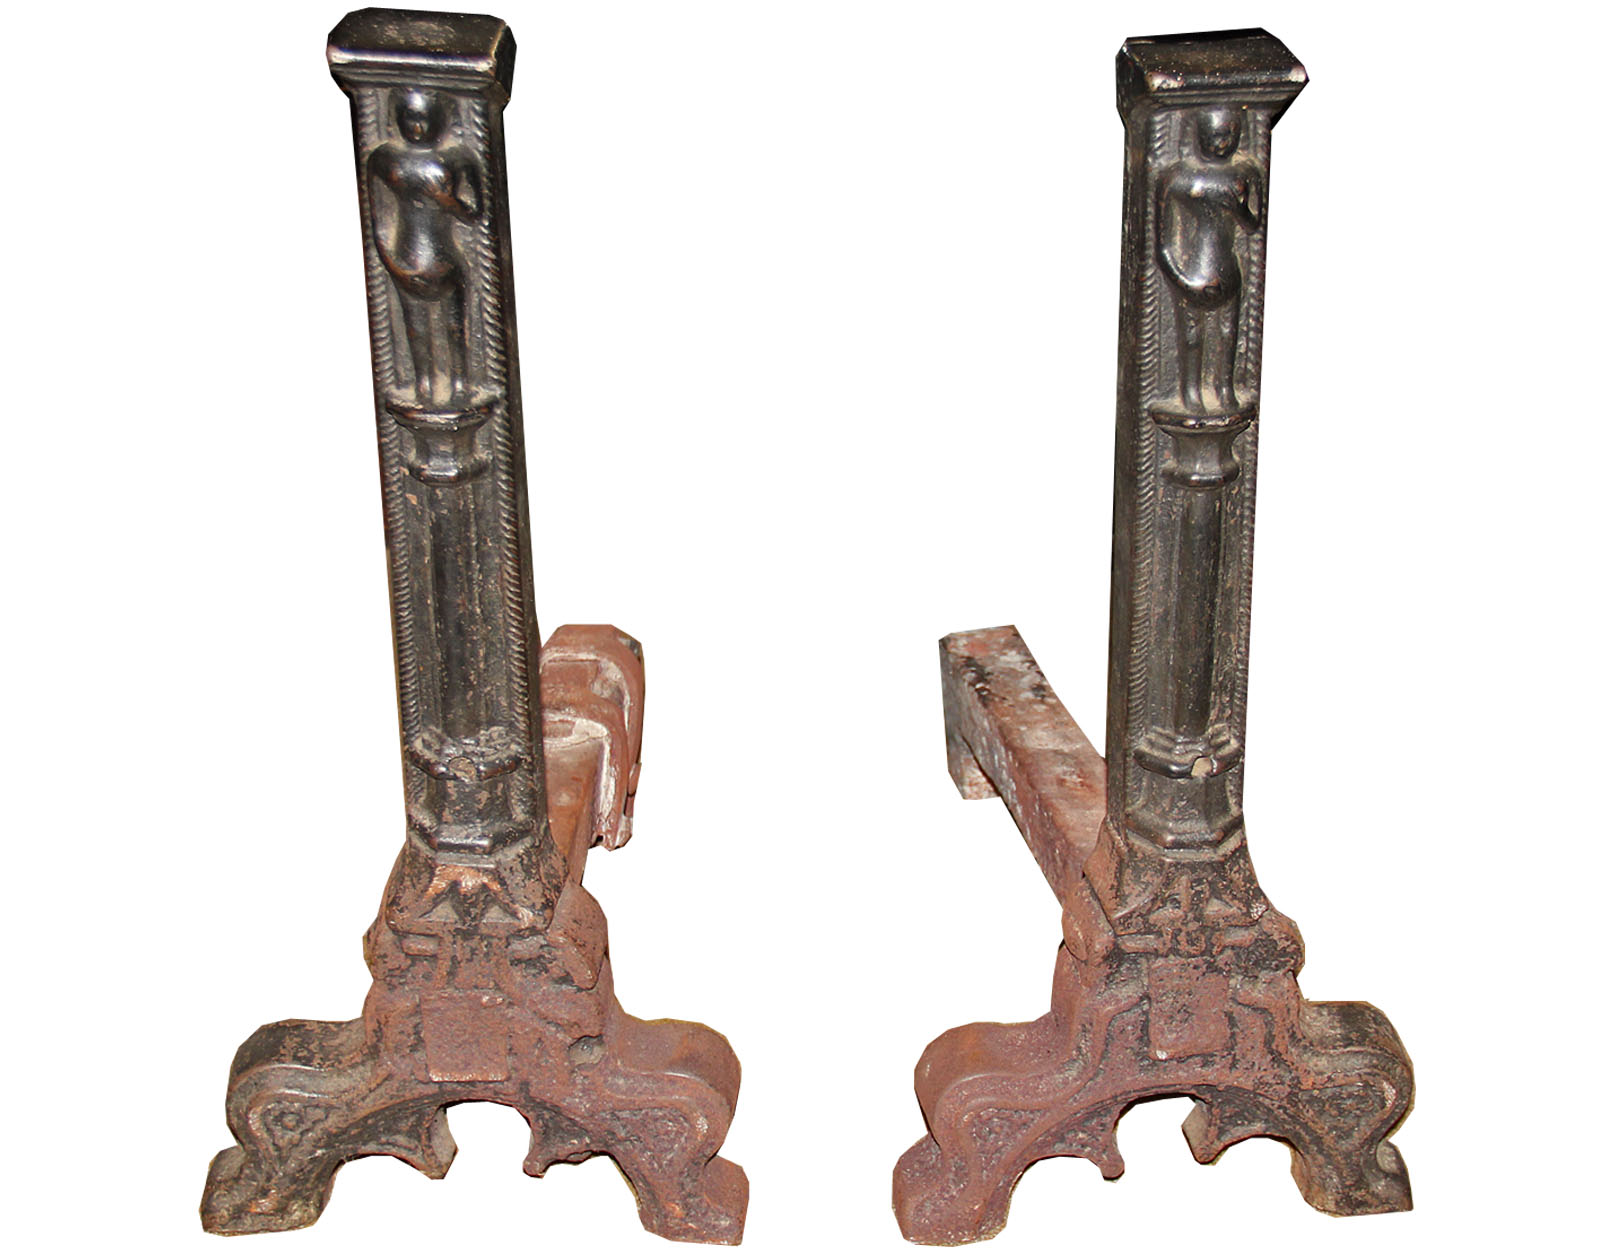 A Pair of 17th Century Flemish Gothic Wrought Iron Andirons No. 4527